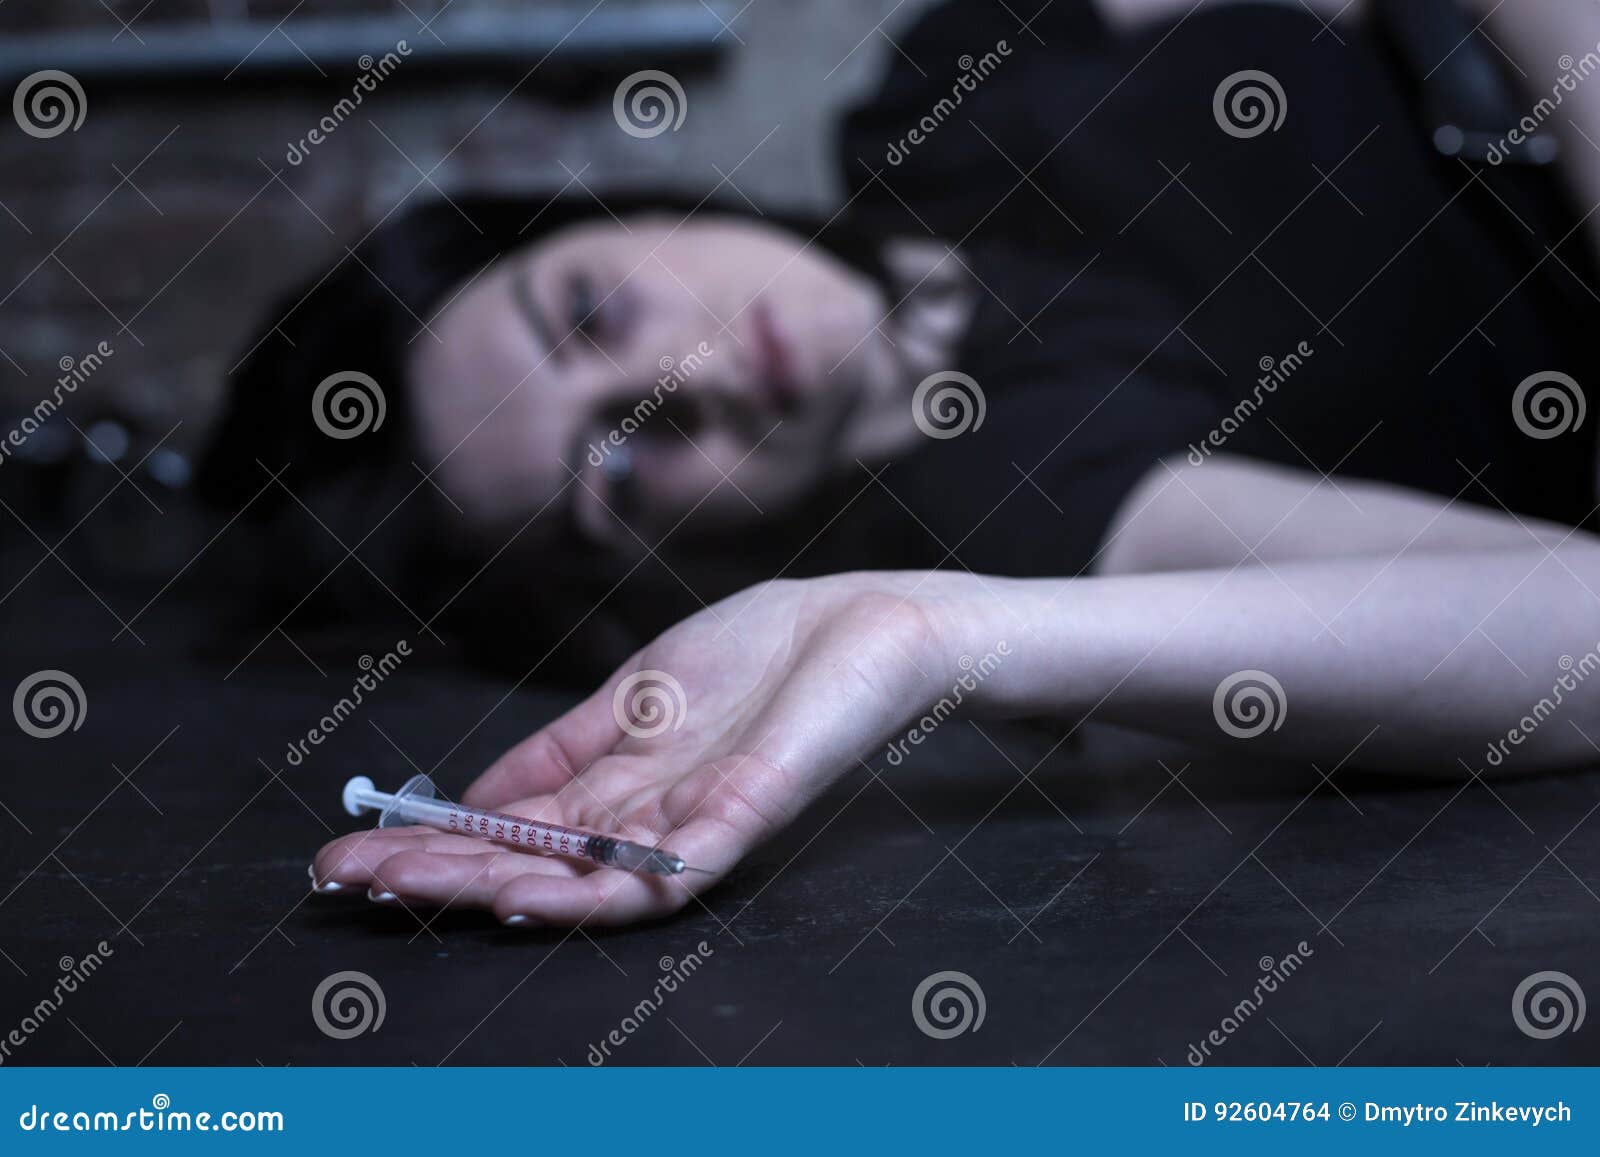 Exhausted Drug Addict Lying on the Ground Stock Photo - Image of ...